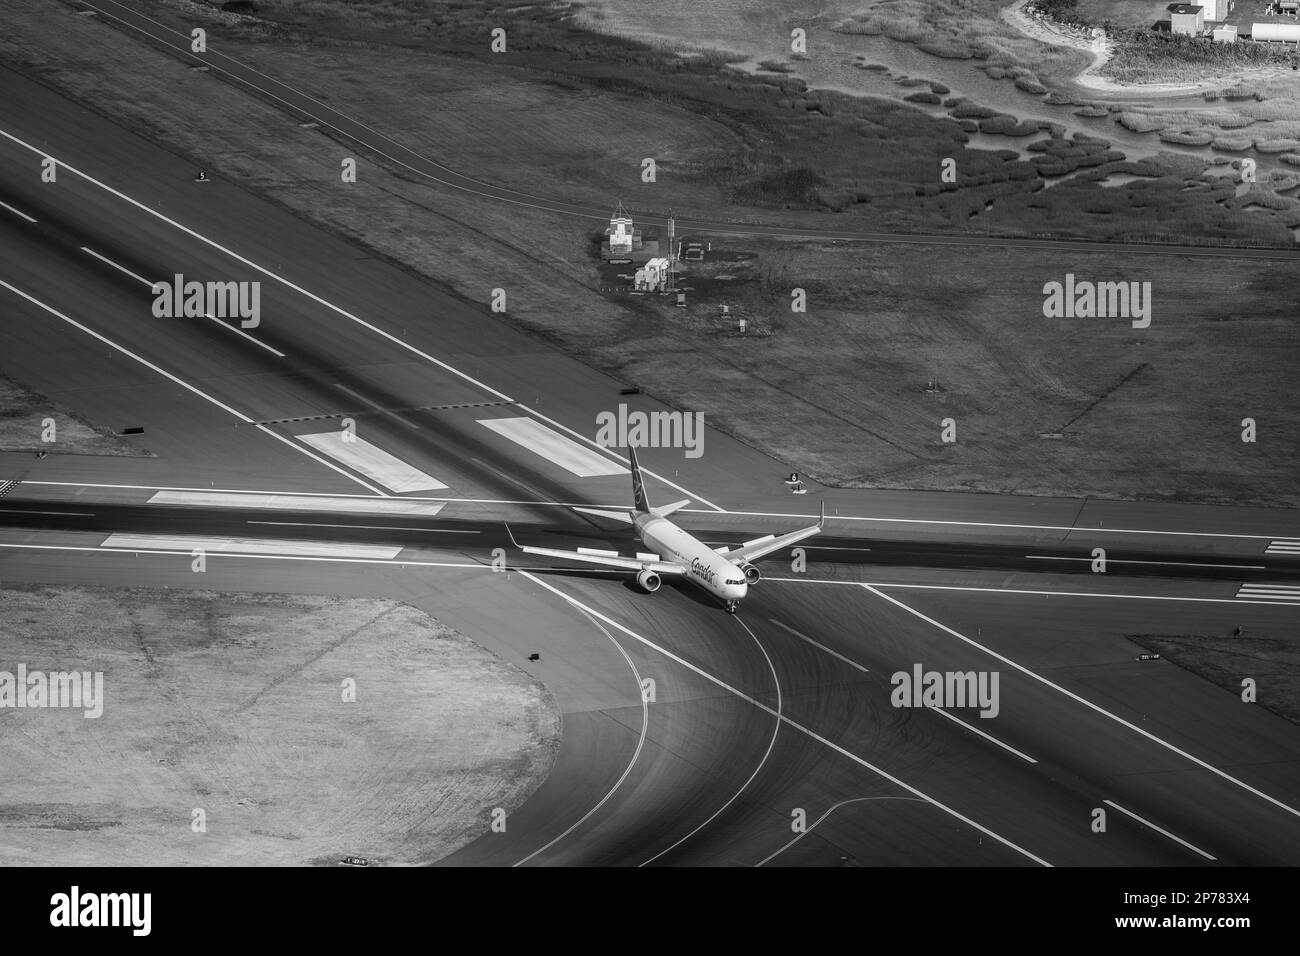 A grayscale shot of a Condor airplane taking off from a tarmac runway at an airport Stock Photo